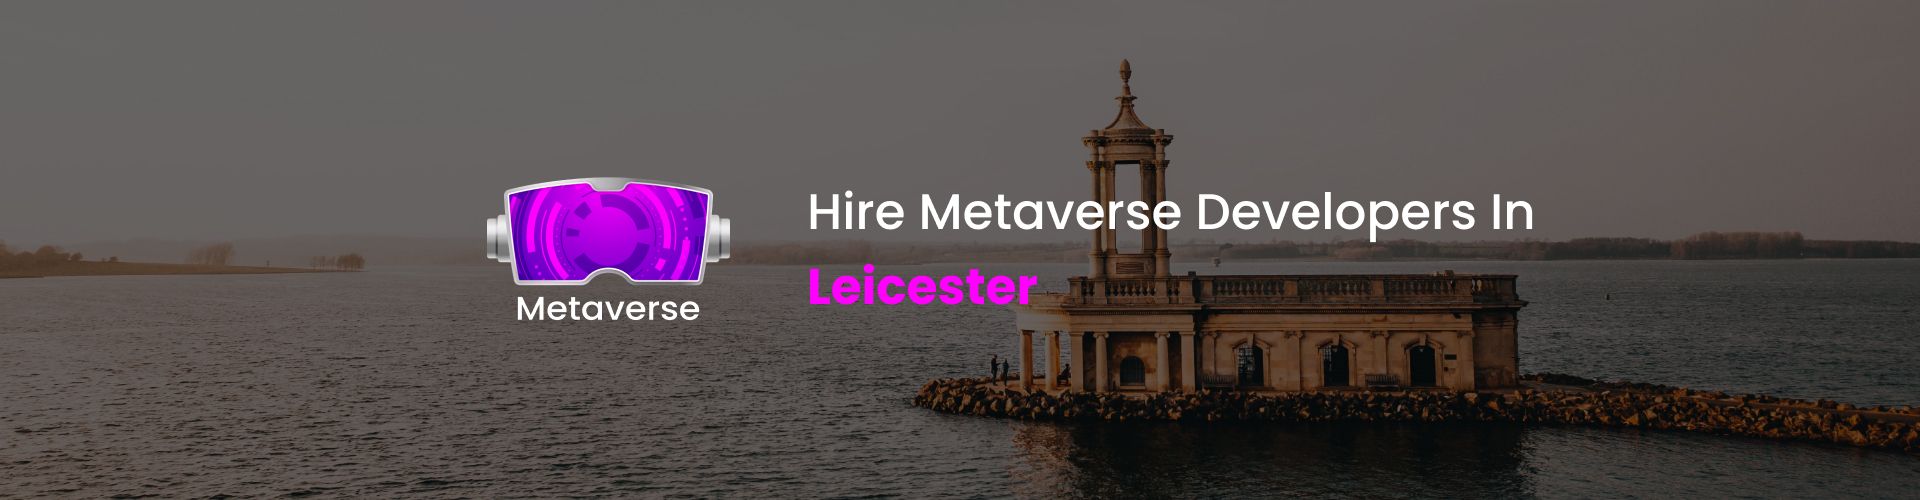 hire metaverse developers in leicester